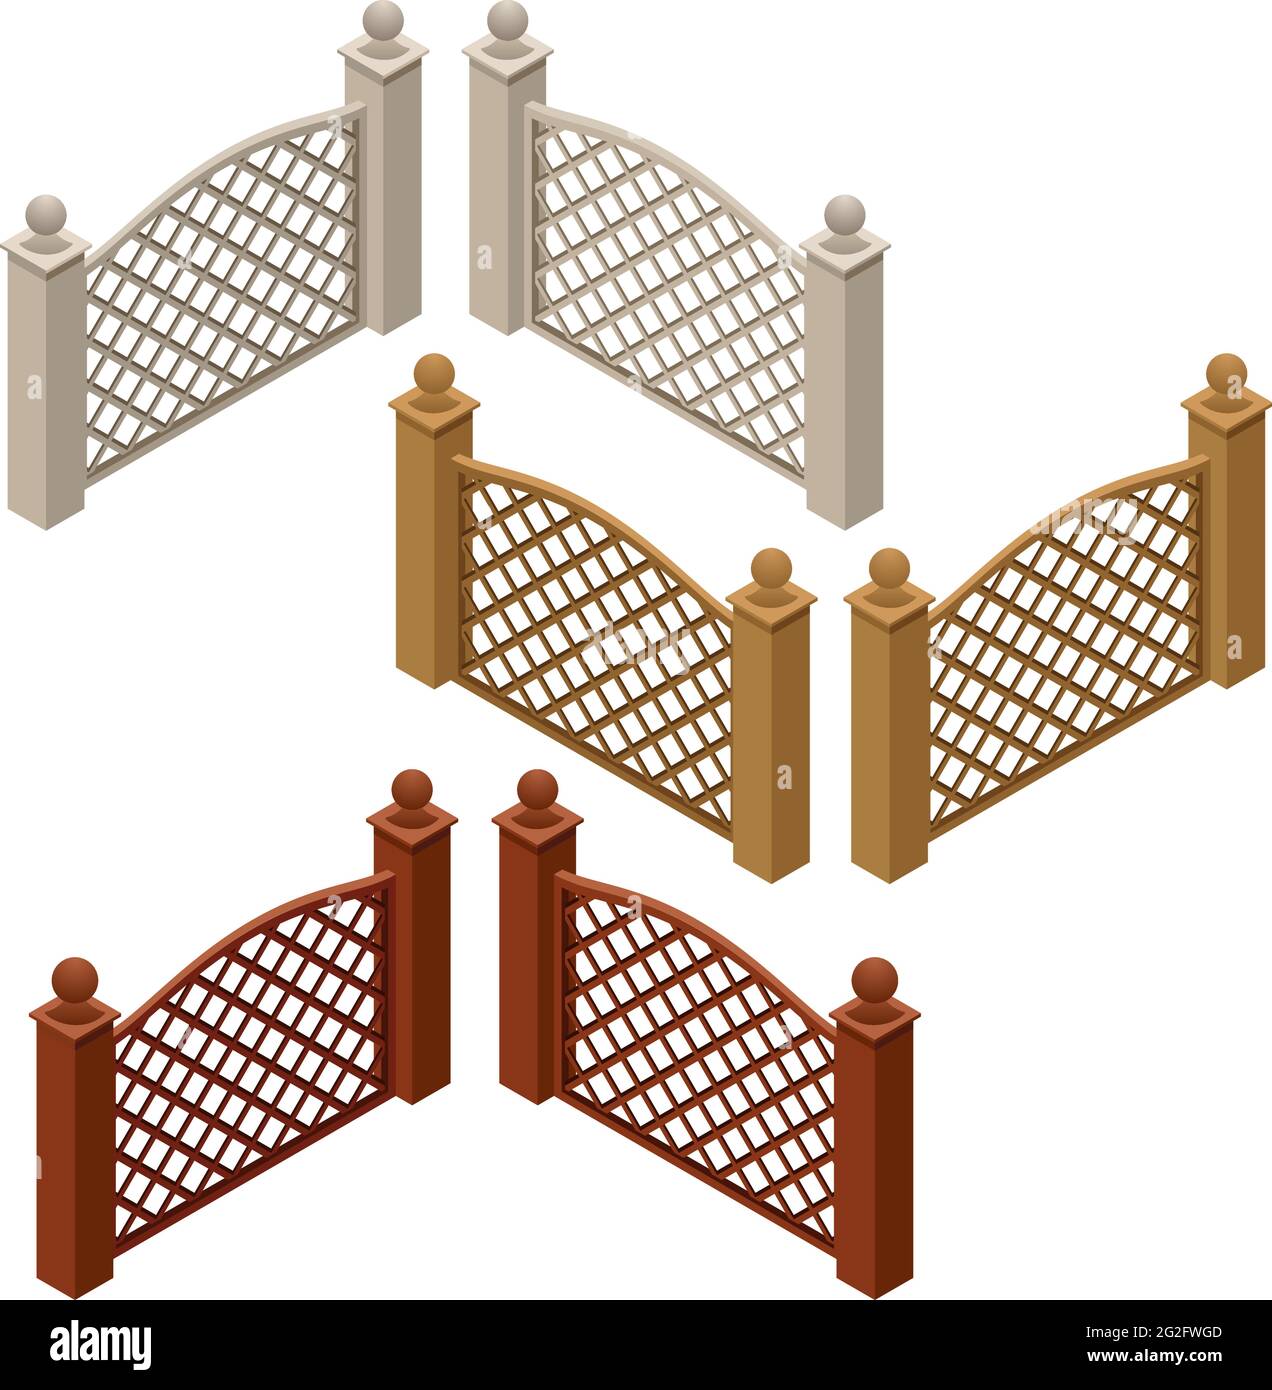 Set of farm or garden fences isolated on white background. Isometric view, can be used as scene elements for game or cartoon asset. Vector illustratio Stock Vector